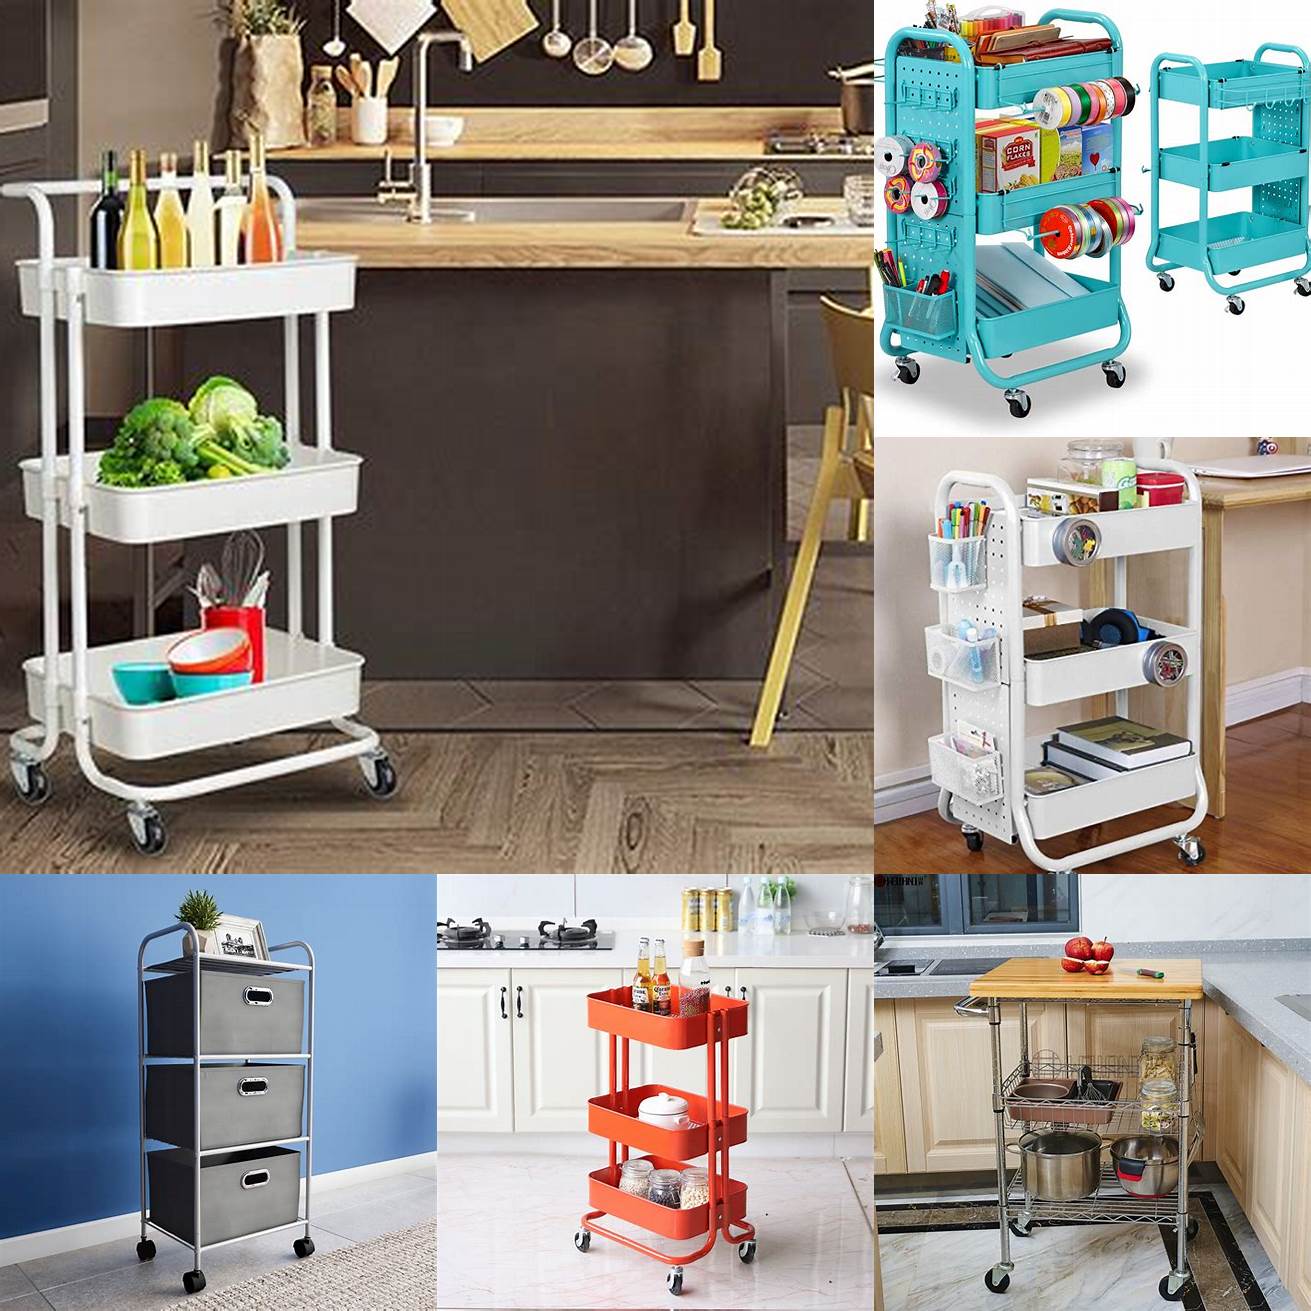 Use a rolling cart to store items